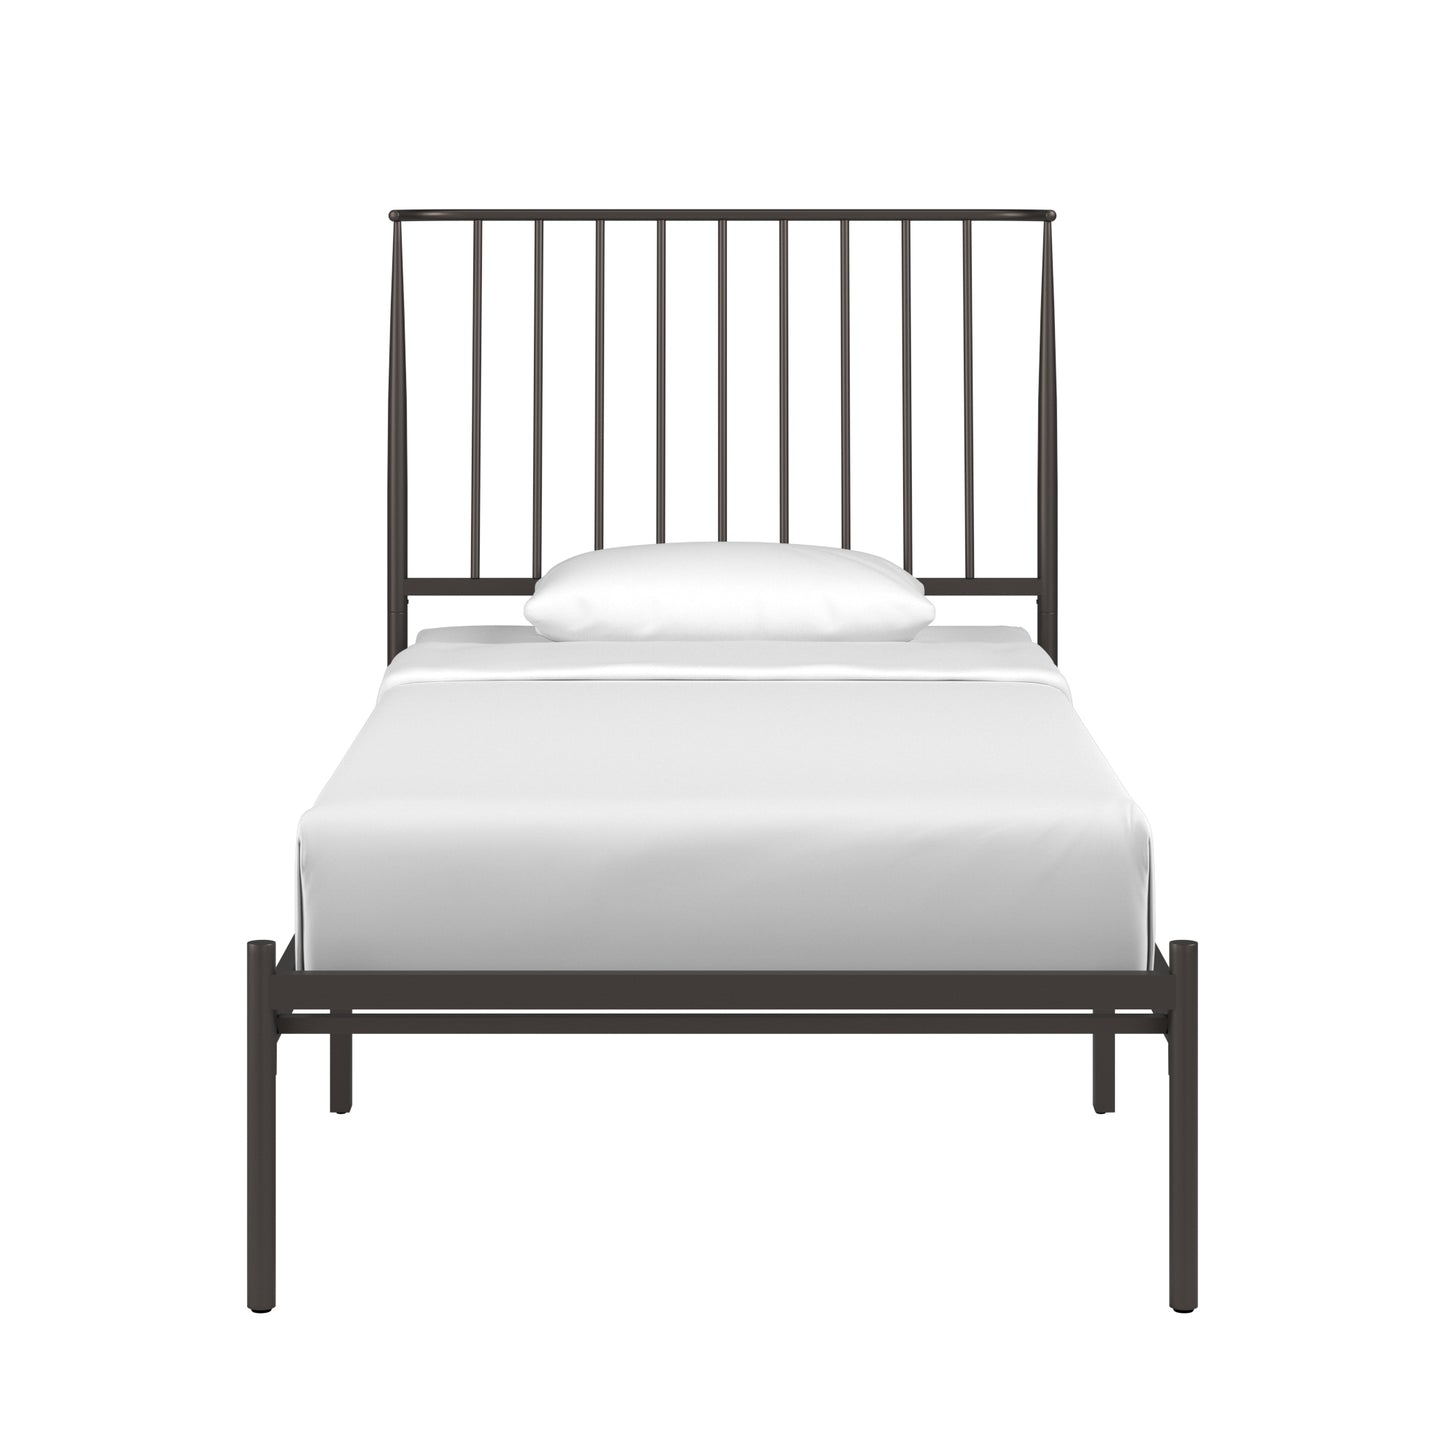 Metal Platform Bed with Curved Metal Headboard (Twin Size)